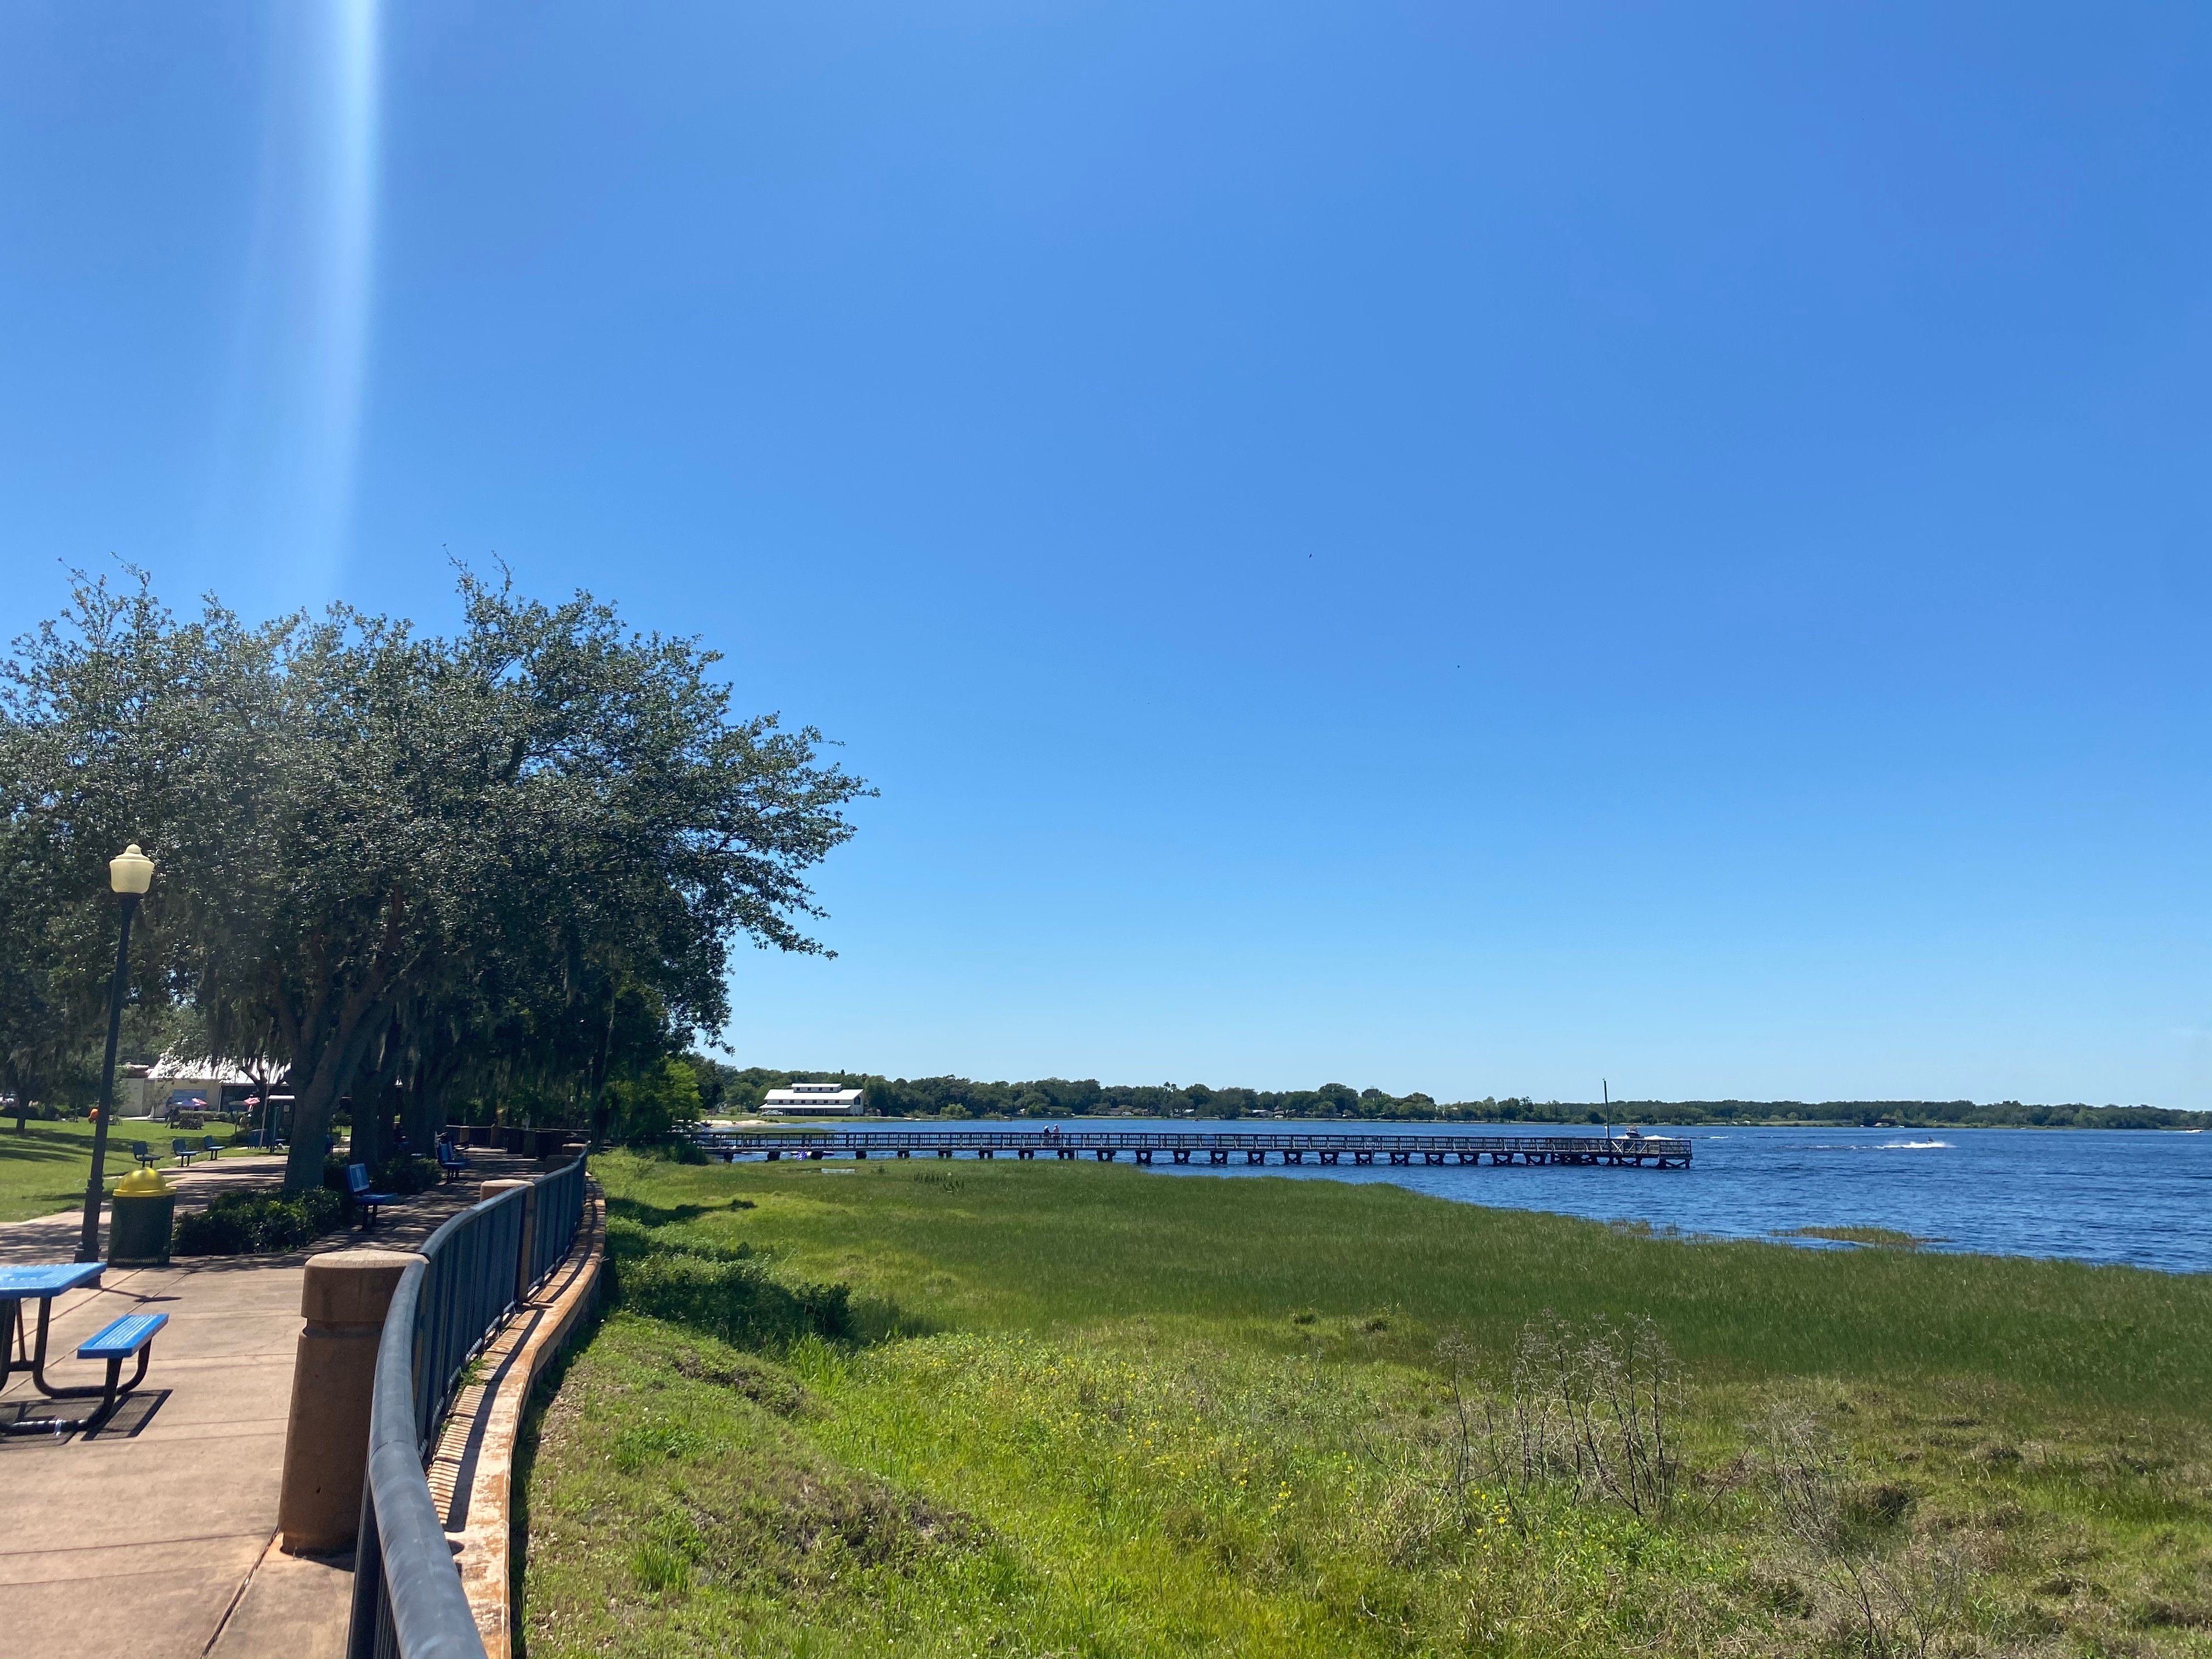 8 Iconic Things to See in Clermont, FL that May Surprise You